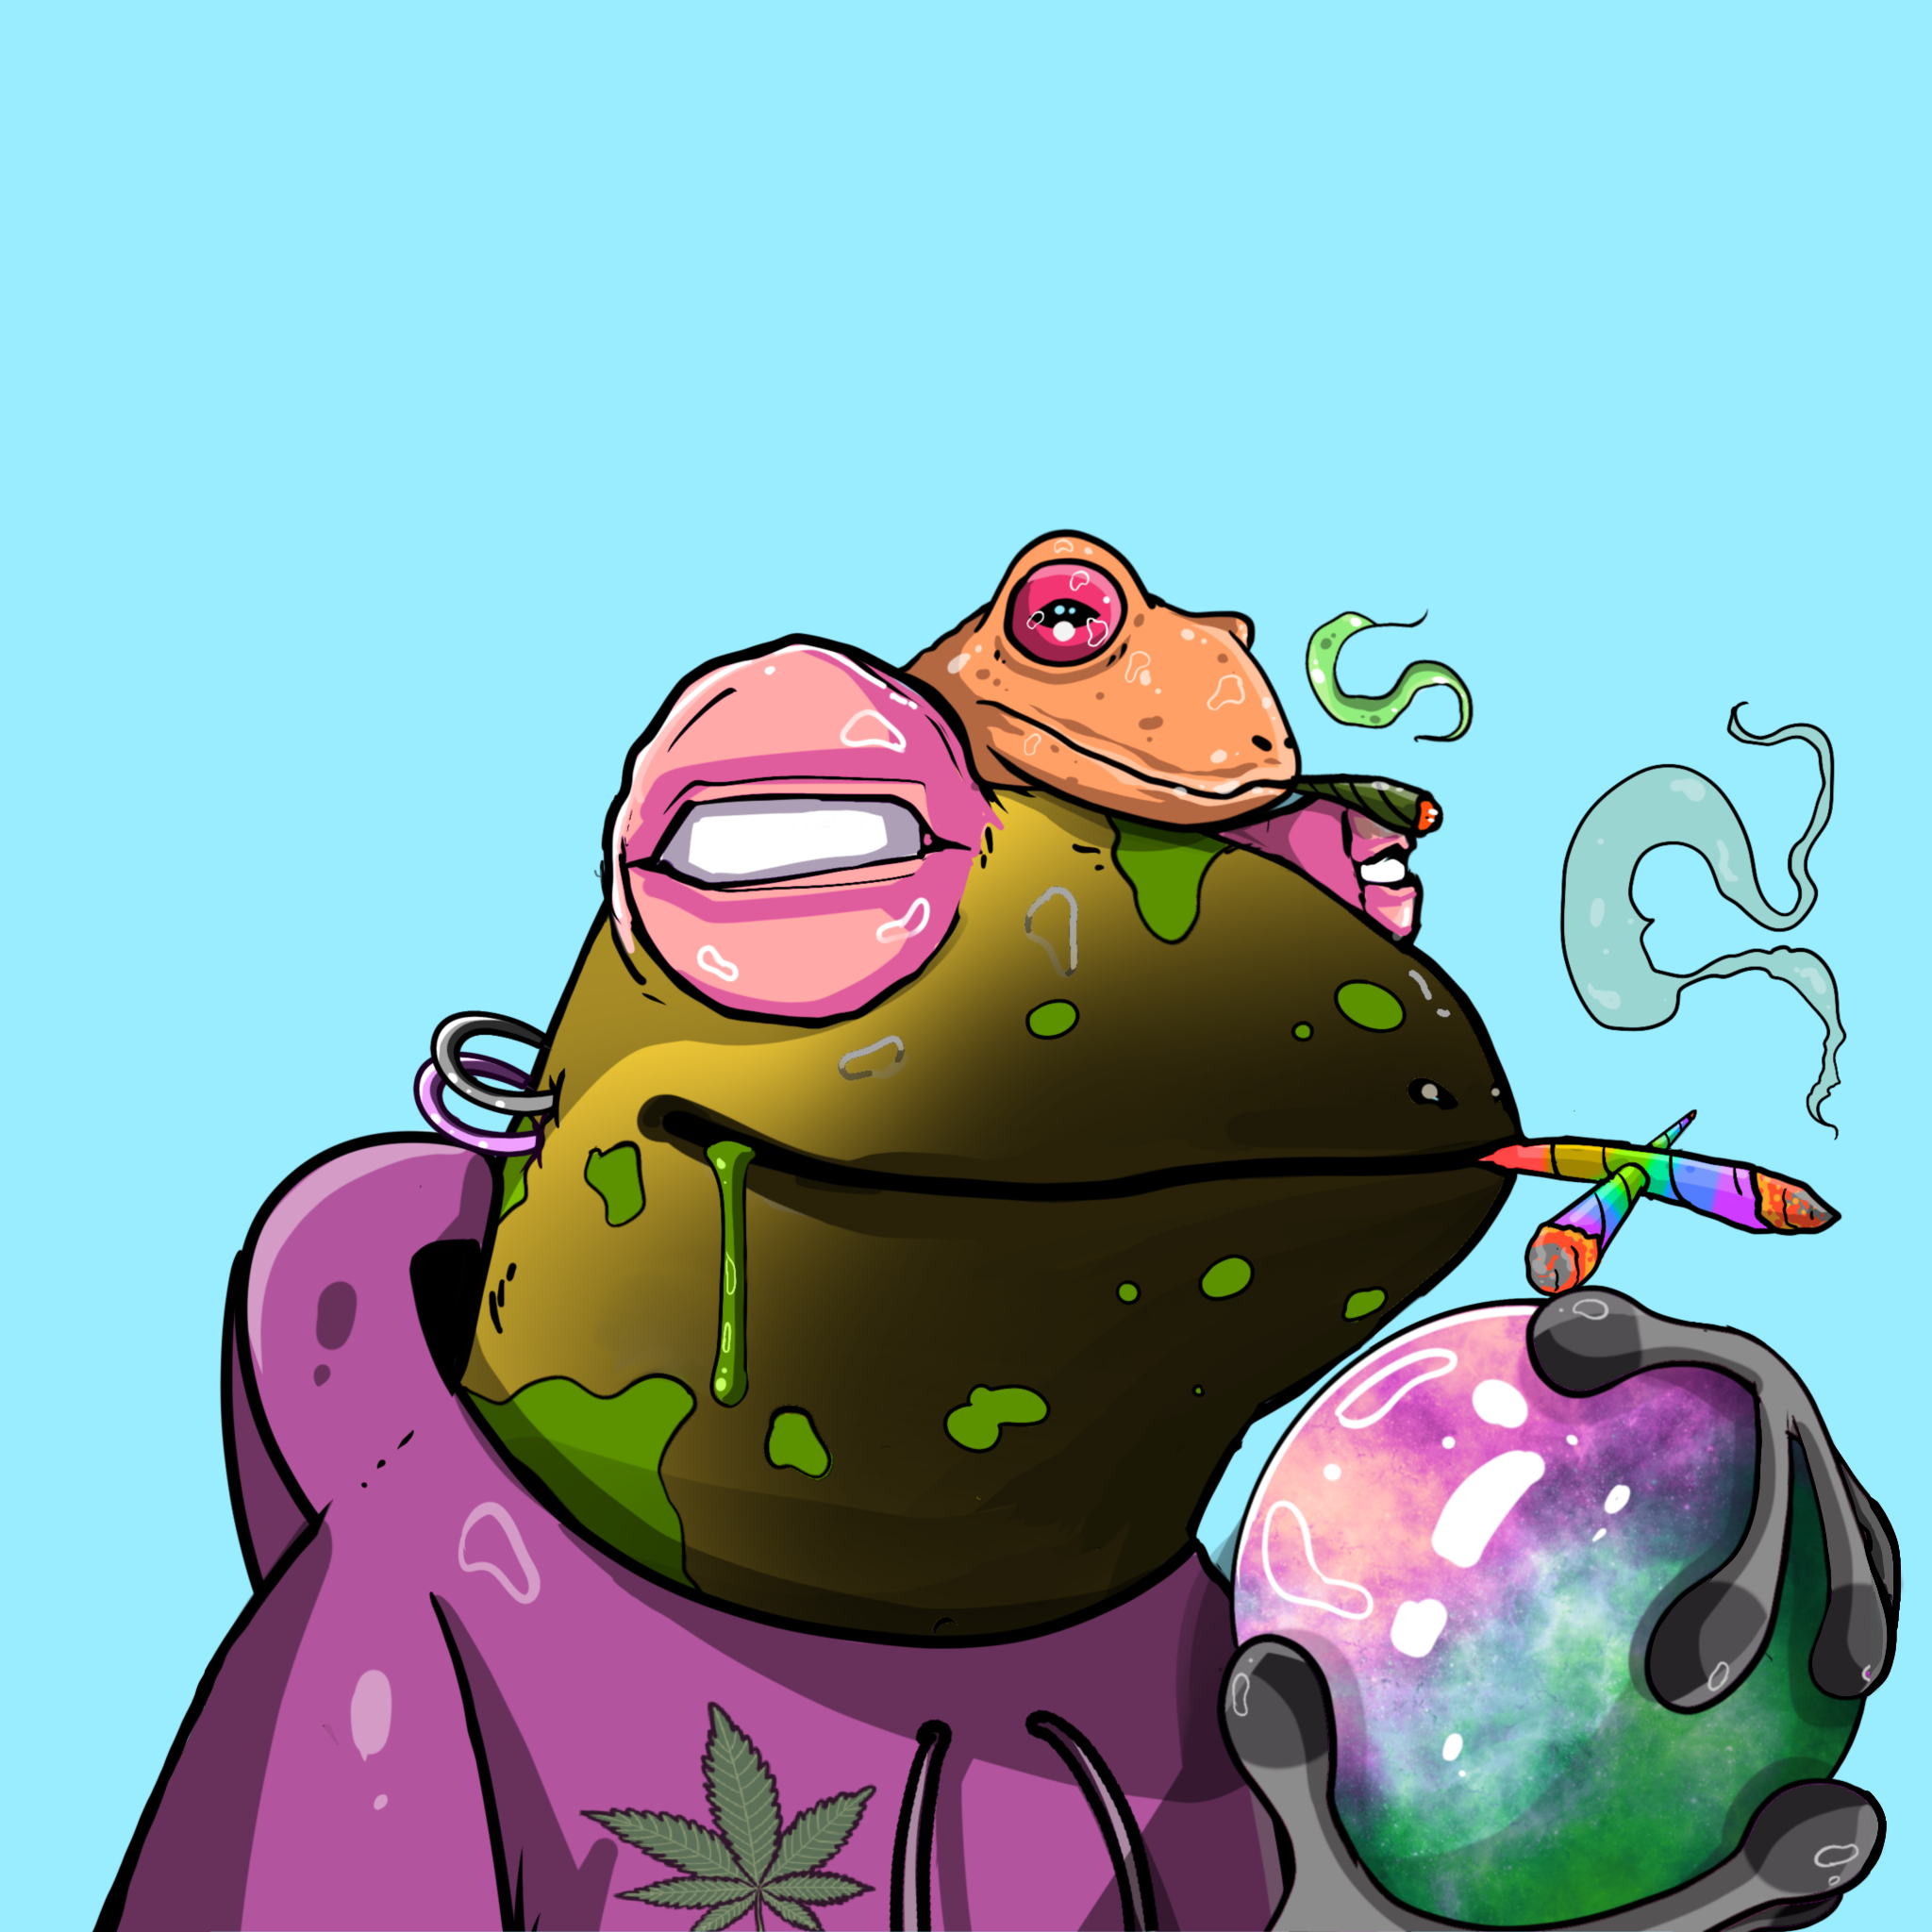 The Stoned Frogs #5577